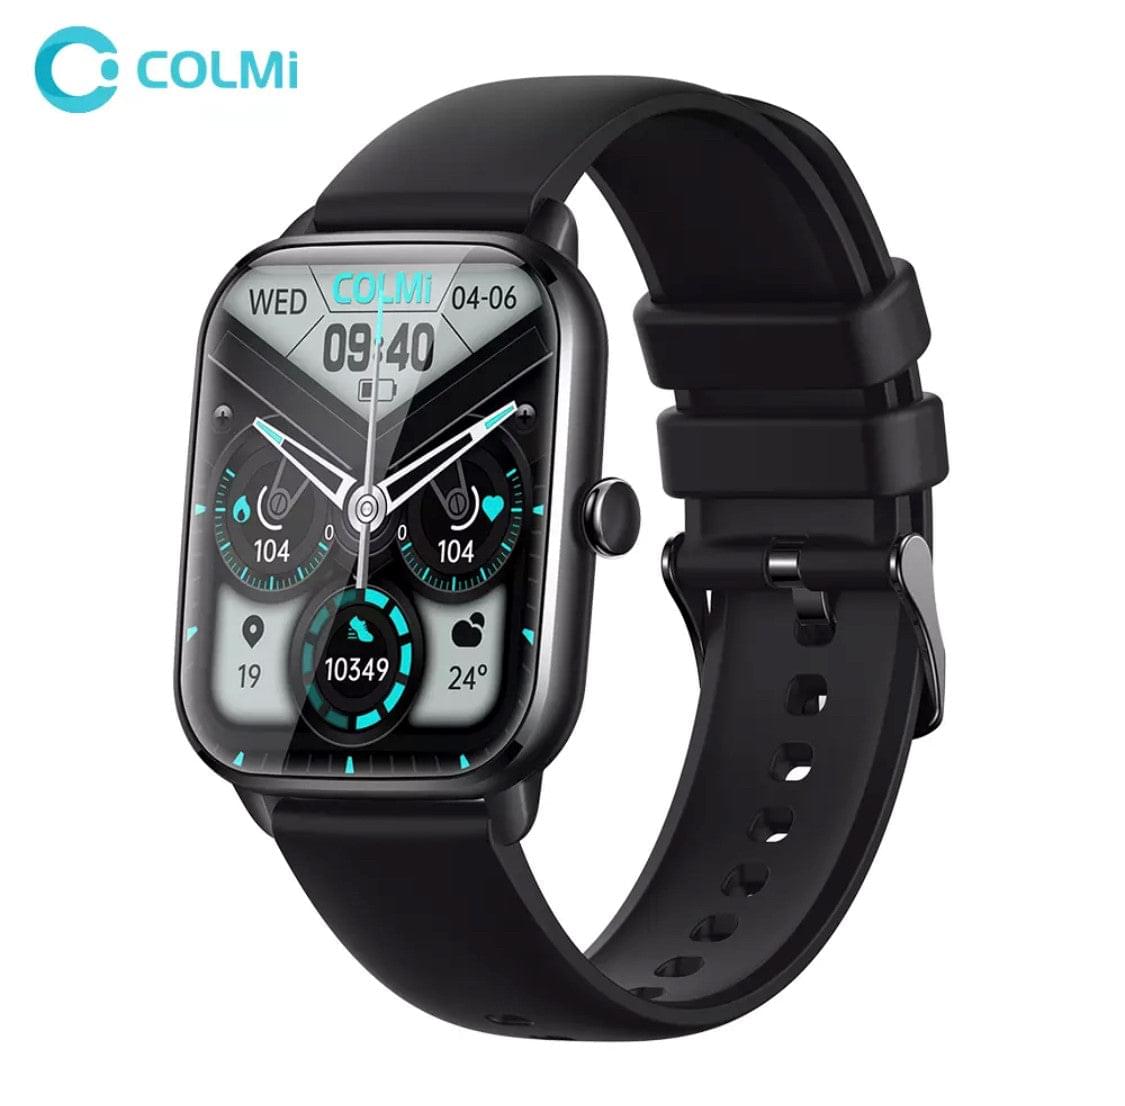 Colmi C61 Pink Smart Watch South Africa